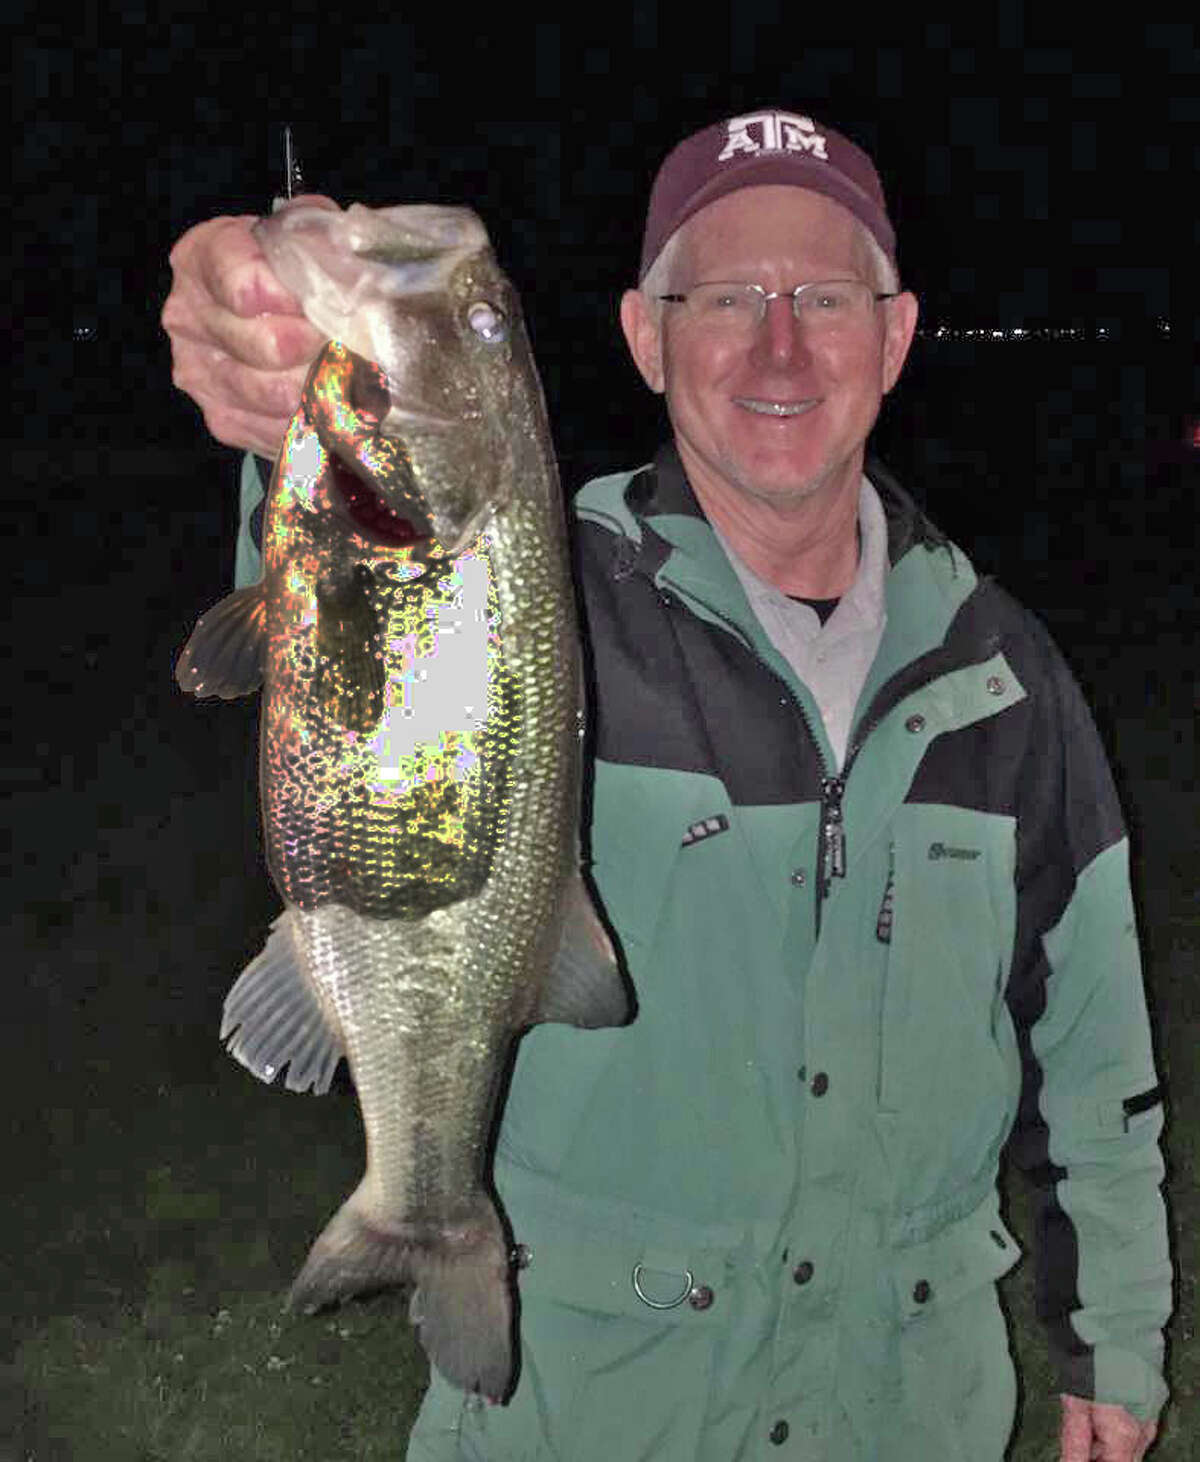 David Perciful came in second place in the CONROEBASS Thursday Night Big Bass Tournament with a weight of 3.65 pounds.